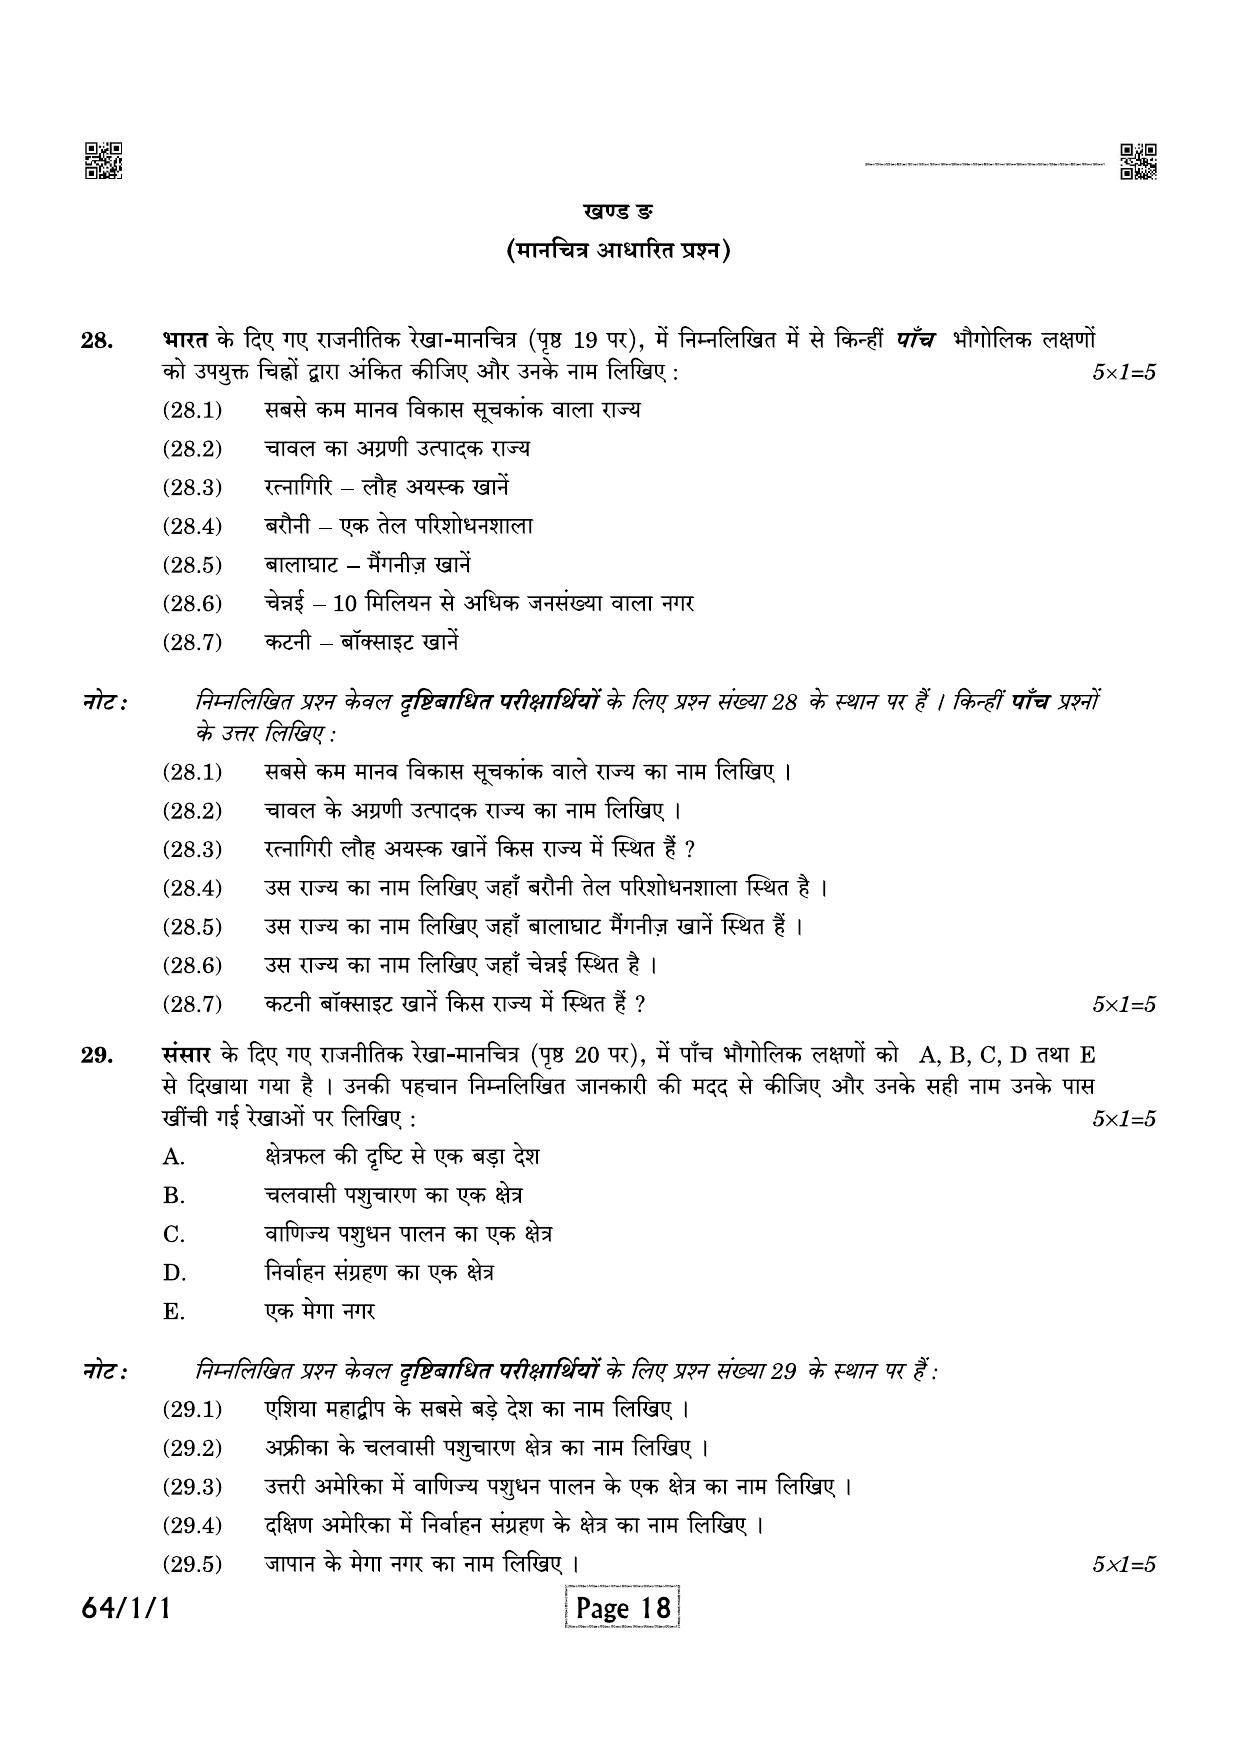 CBSE Class 12 QP_029_Geography 2021 Compartment Question Paper - Page 18